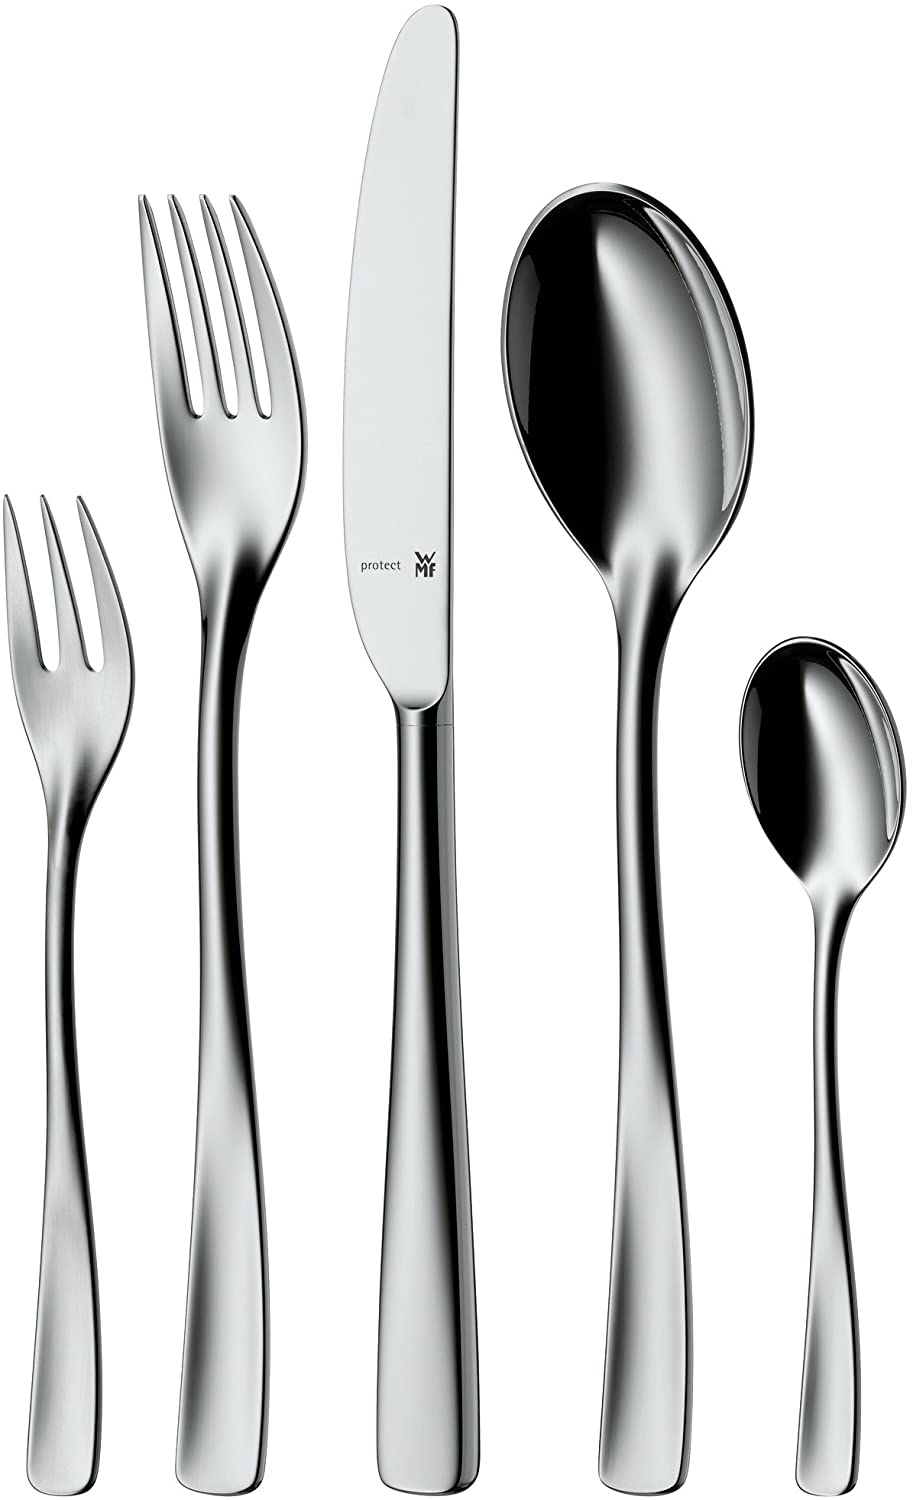 WMF Ambiente Cutlery Set for 12 People, 60 Pieces, Hollow Staple Knife, Polished Cromargan Protect, Scratch-Resistant, Dishwasher Safe